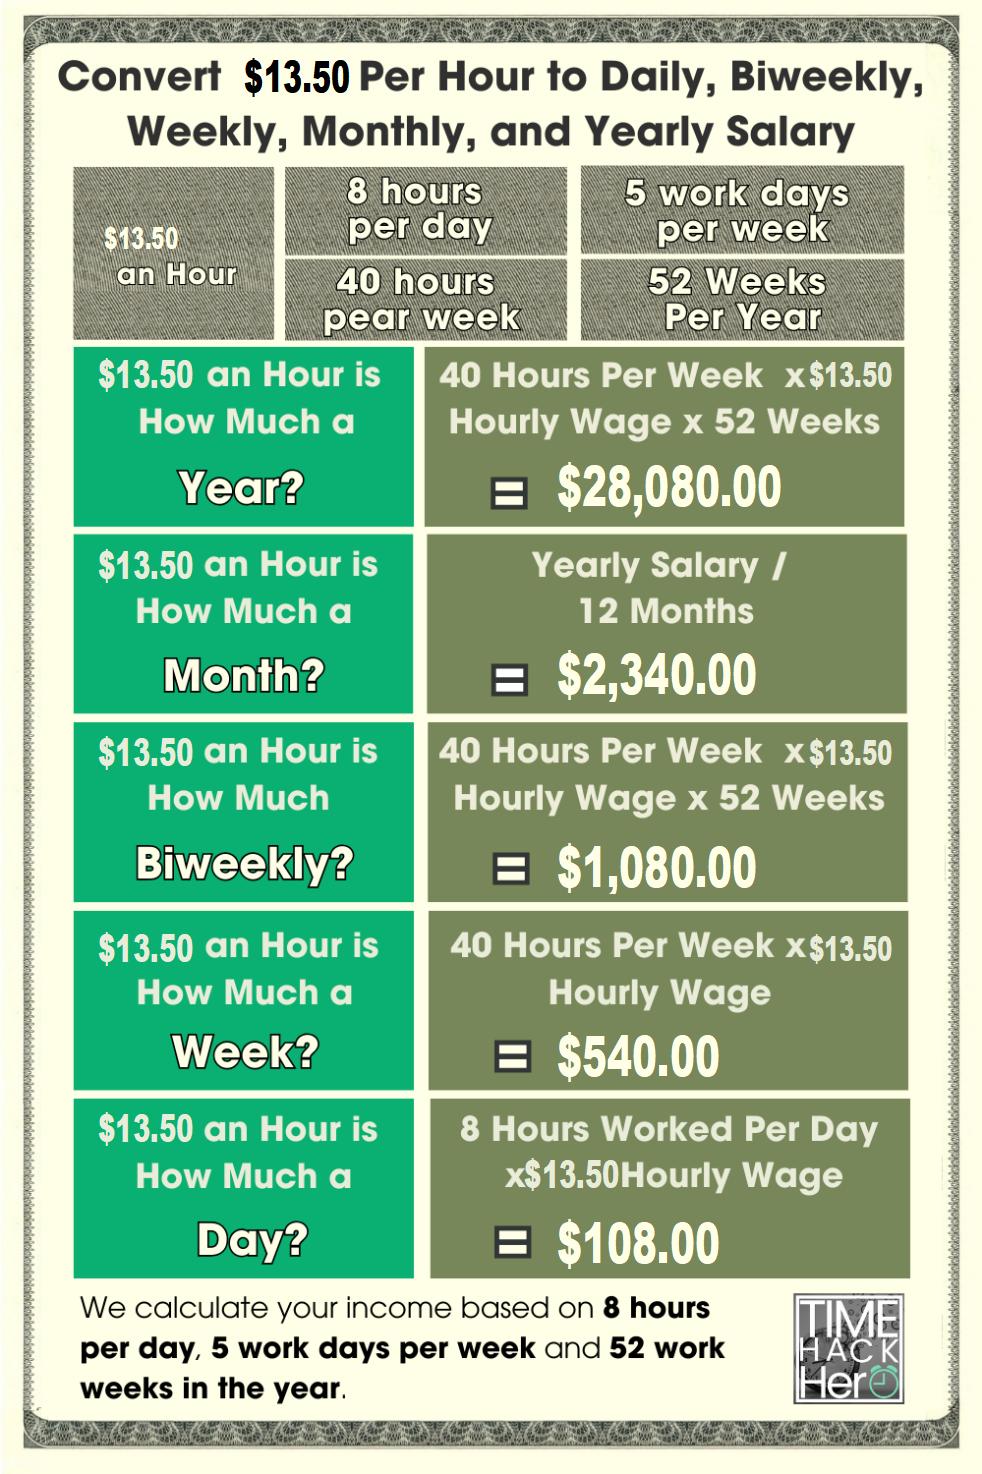 Convert $13.50 Per Hour to Weekly, Monthly, and Yearly Salary